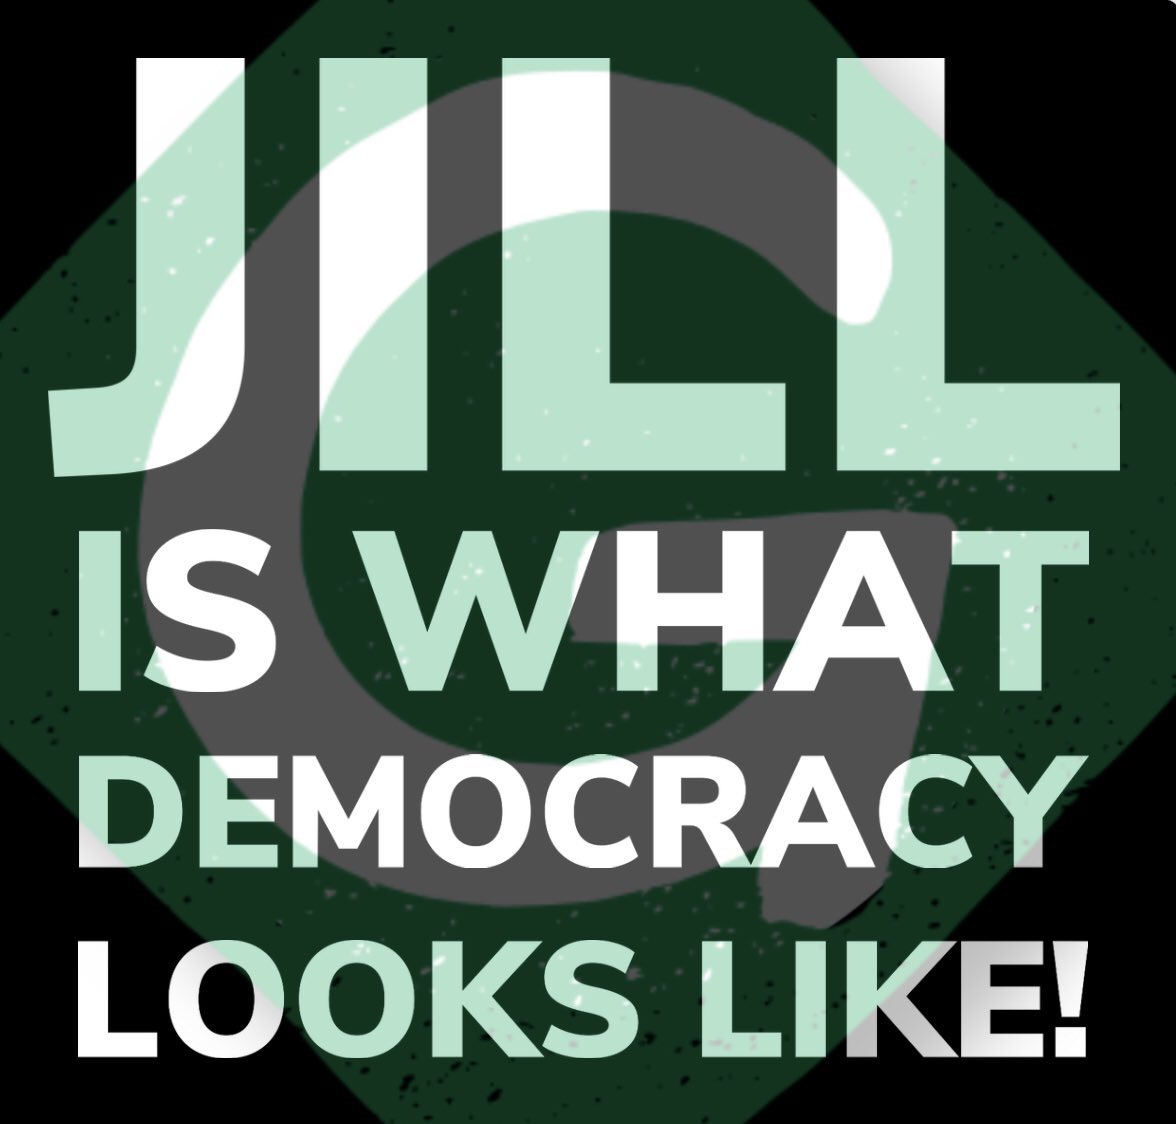 Students need to come out in droves for @DrJillStein. Don’t let the Zionist duopoly trample on your rights to peacefully assemble. Vote for the only candidate that got arrested standing with you! #VoteGreen #FreePalestine